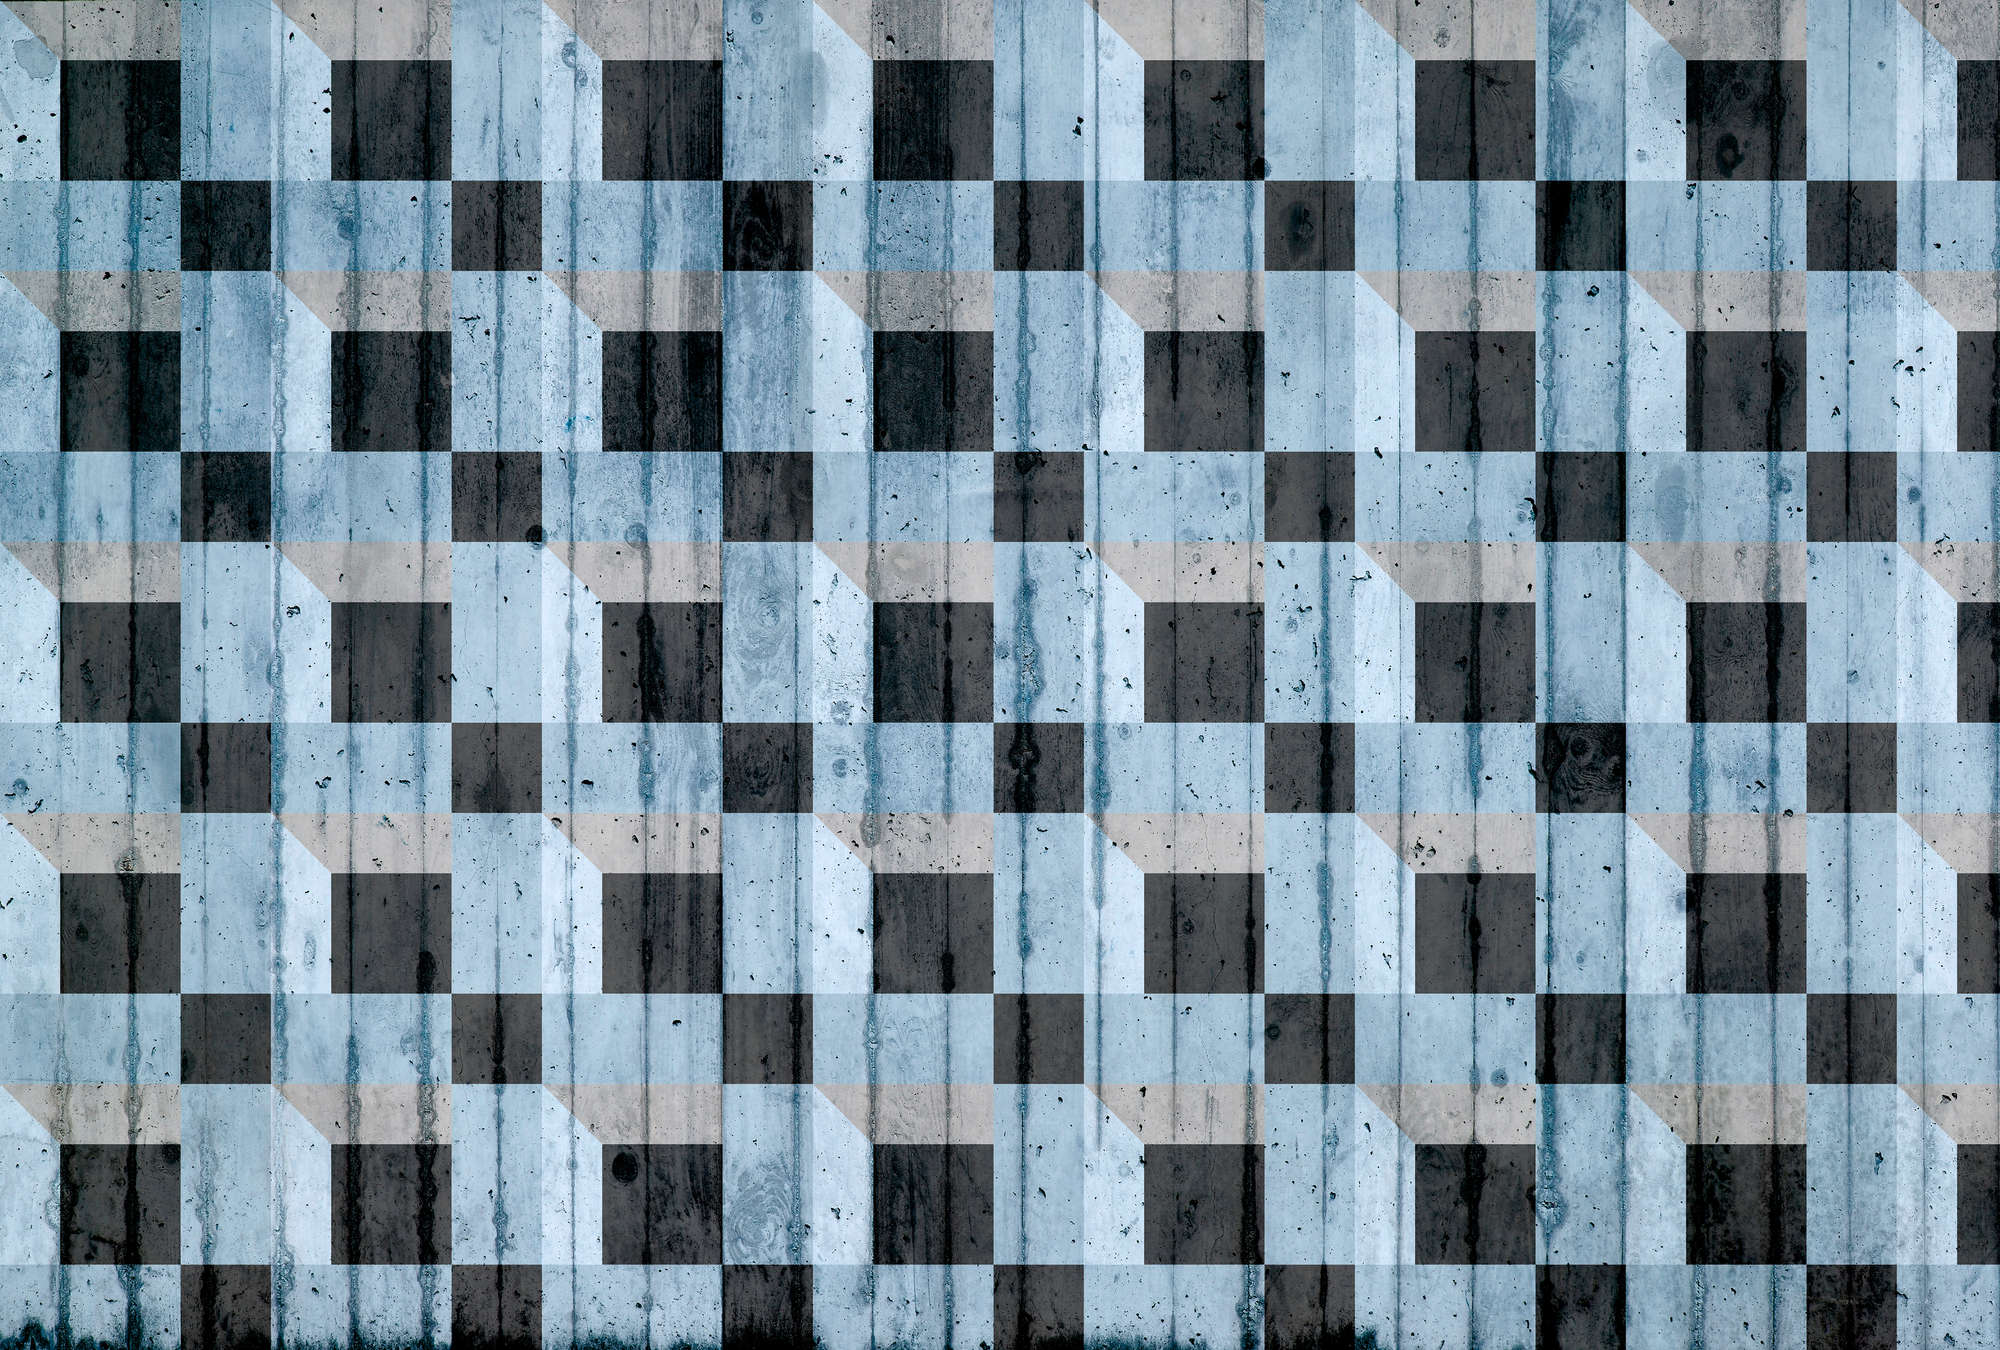             Photo wallpaper concrete look with square pattern - blue, black, grey
        